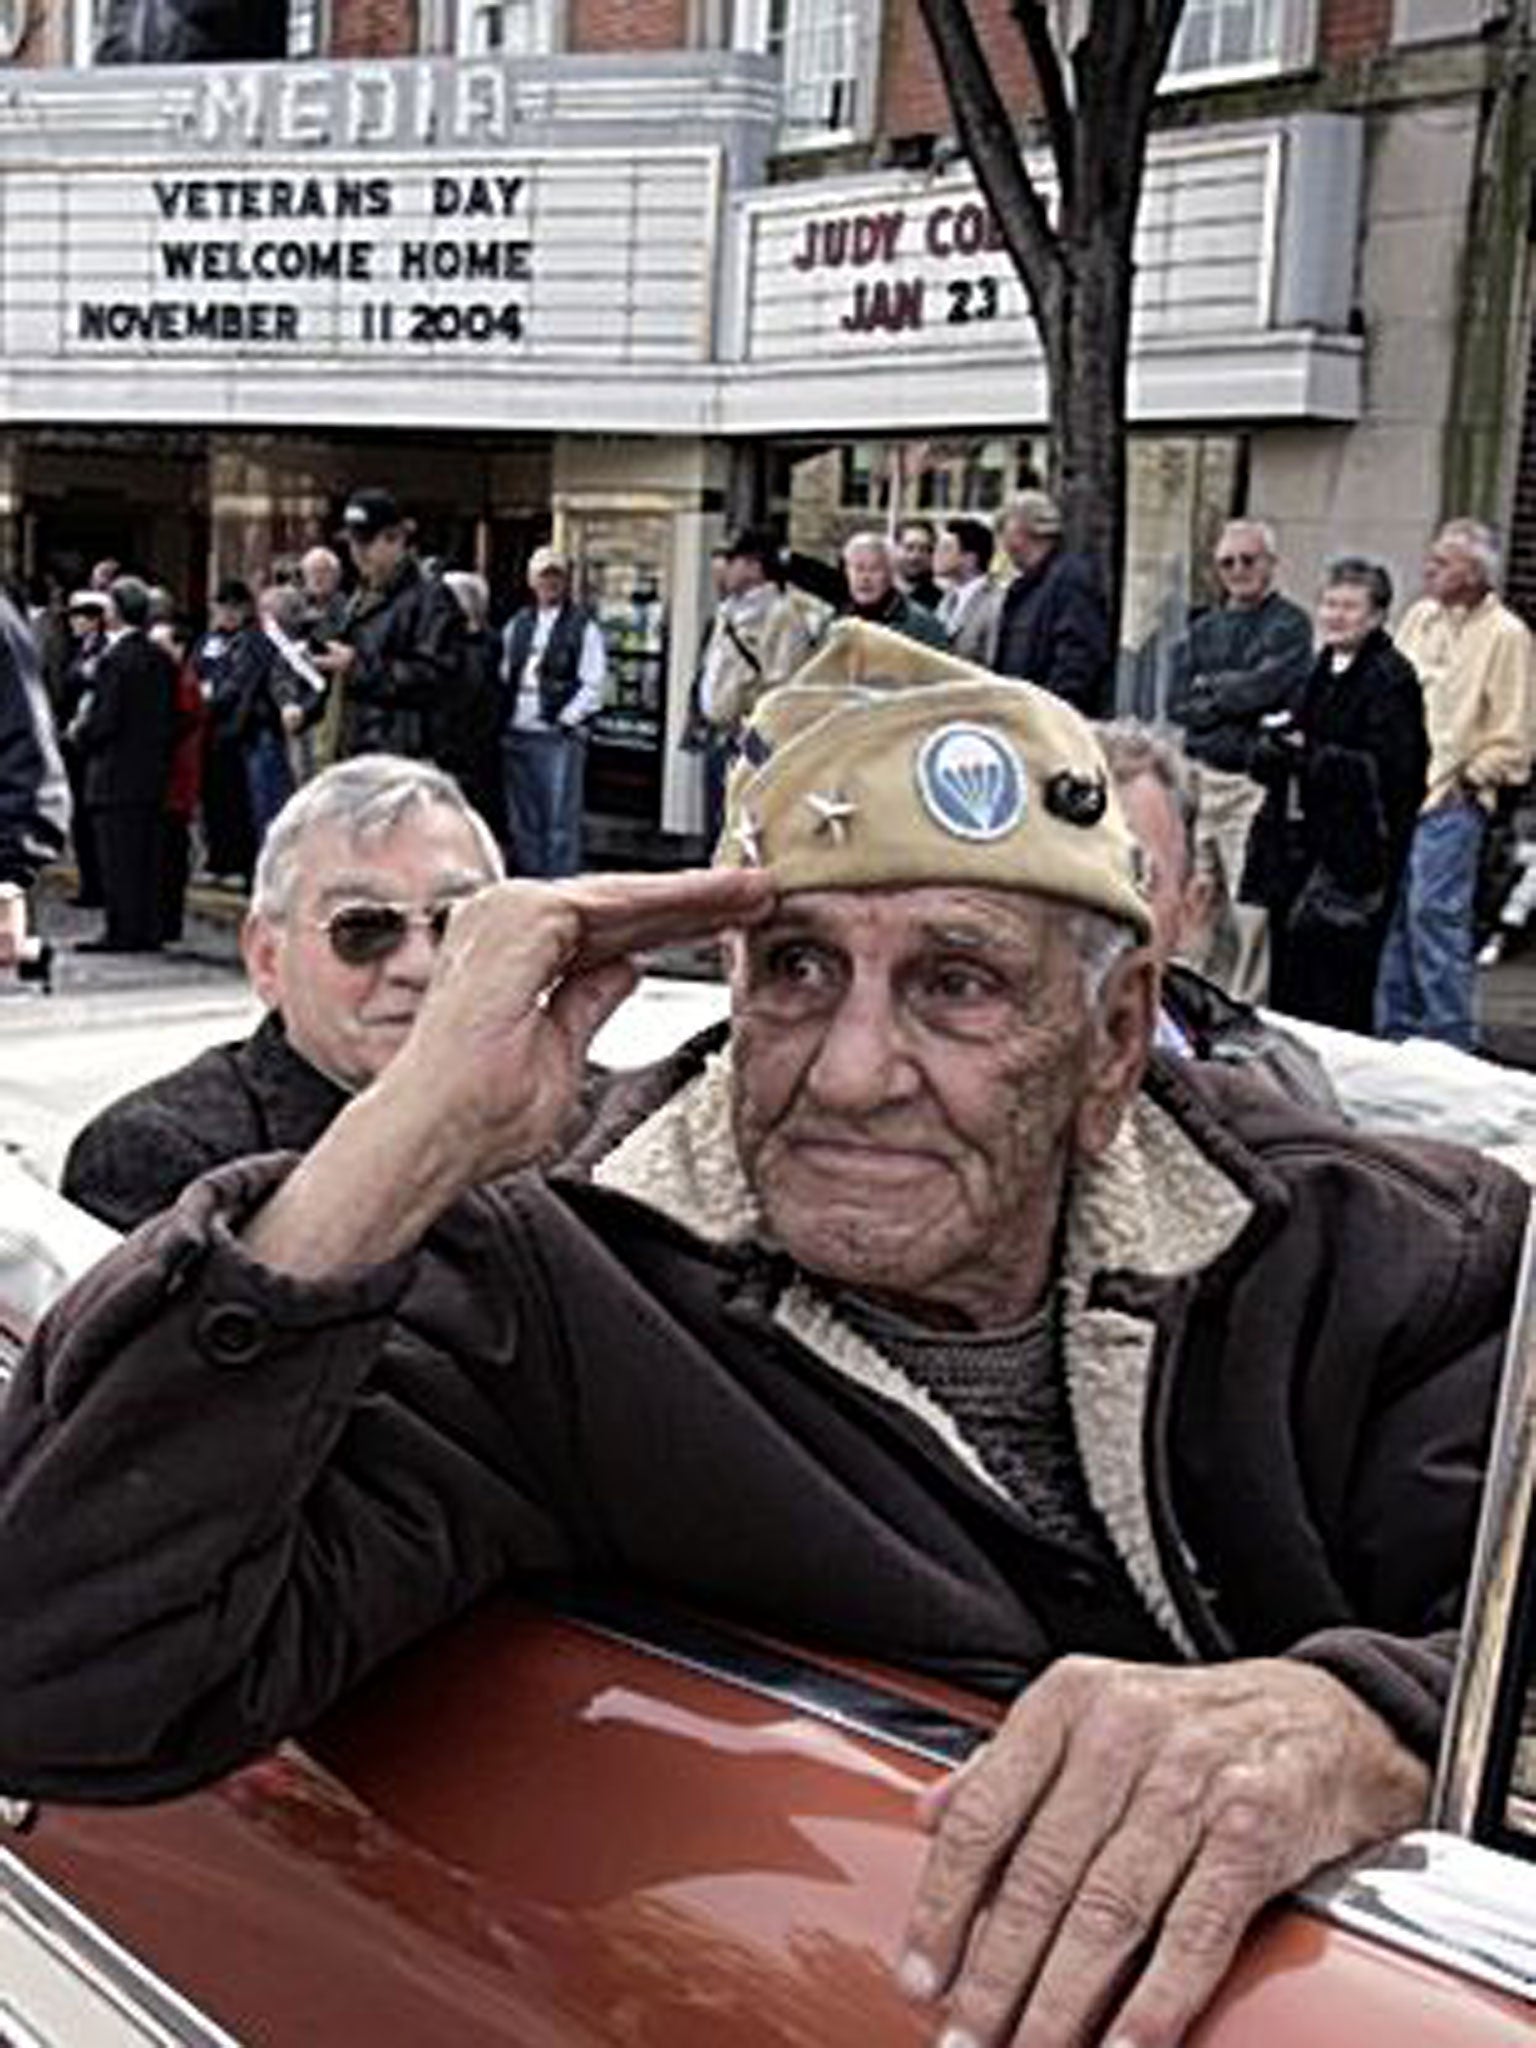 Guarnere takes part in a Veterans Day parade in Media, Pennsylvania in 2004